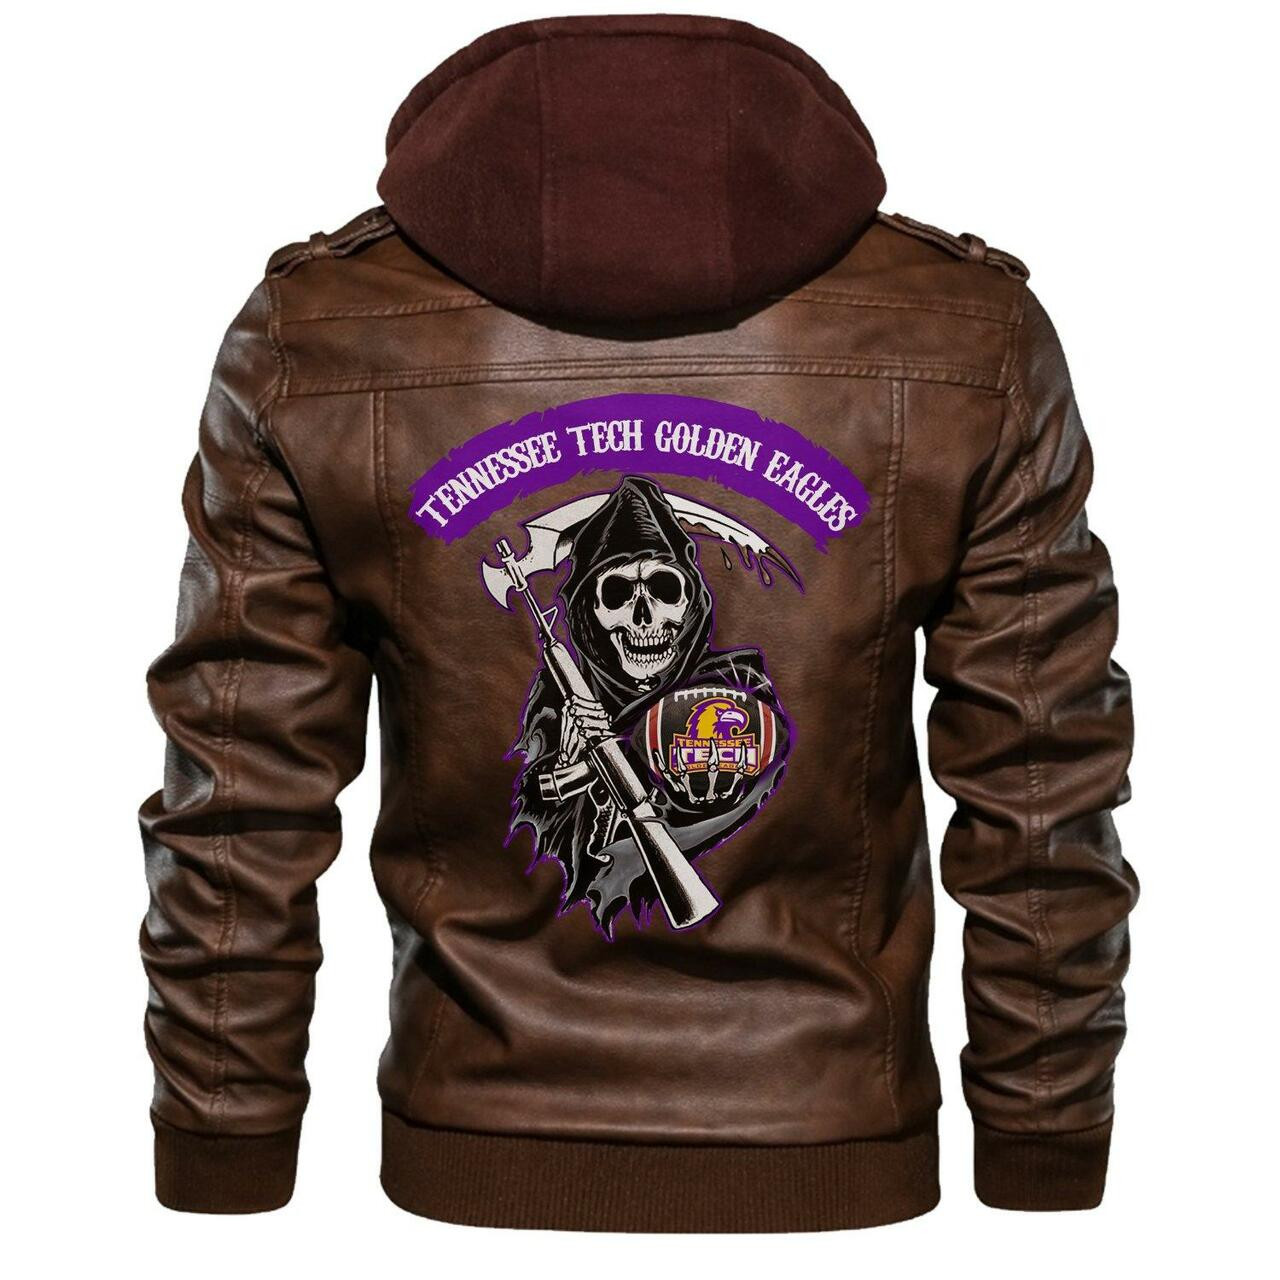 You can find Leather Jacket online at a great price 35